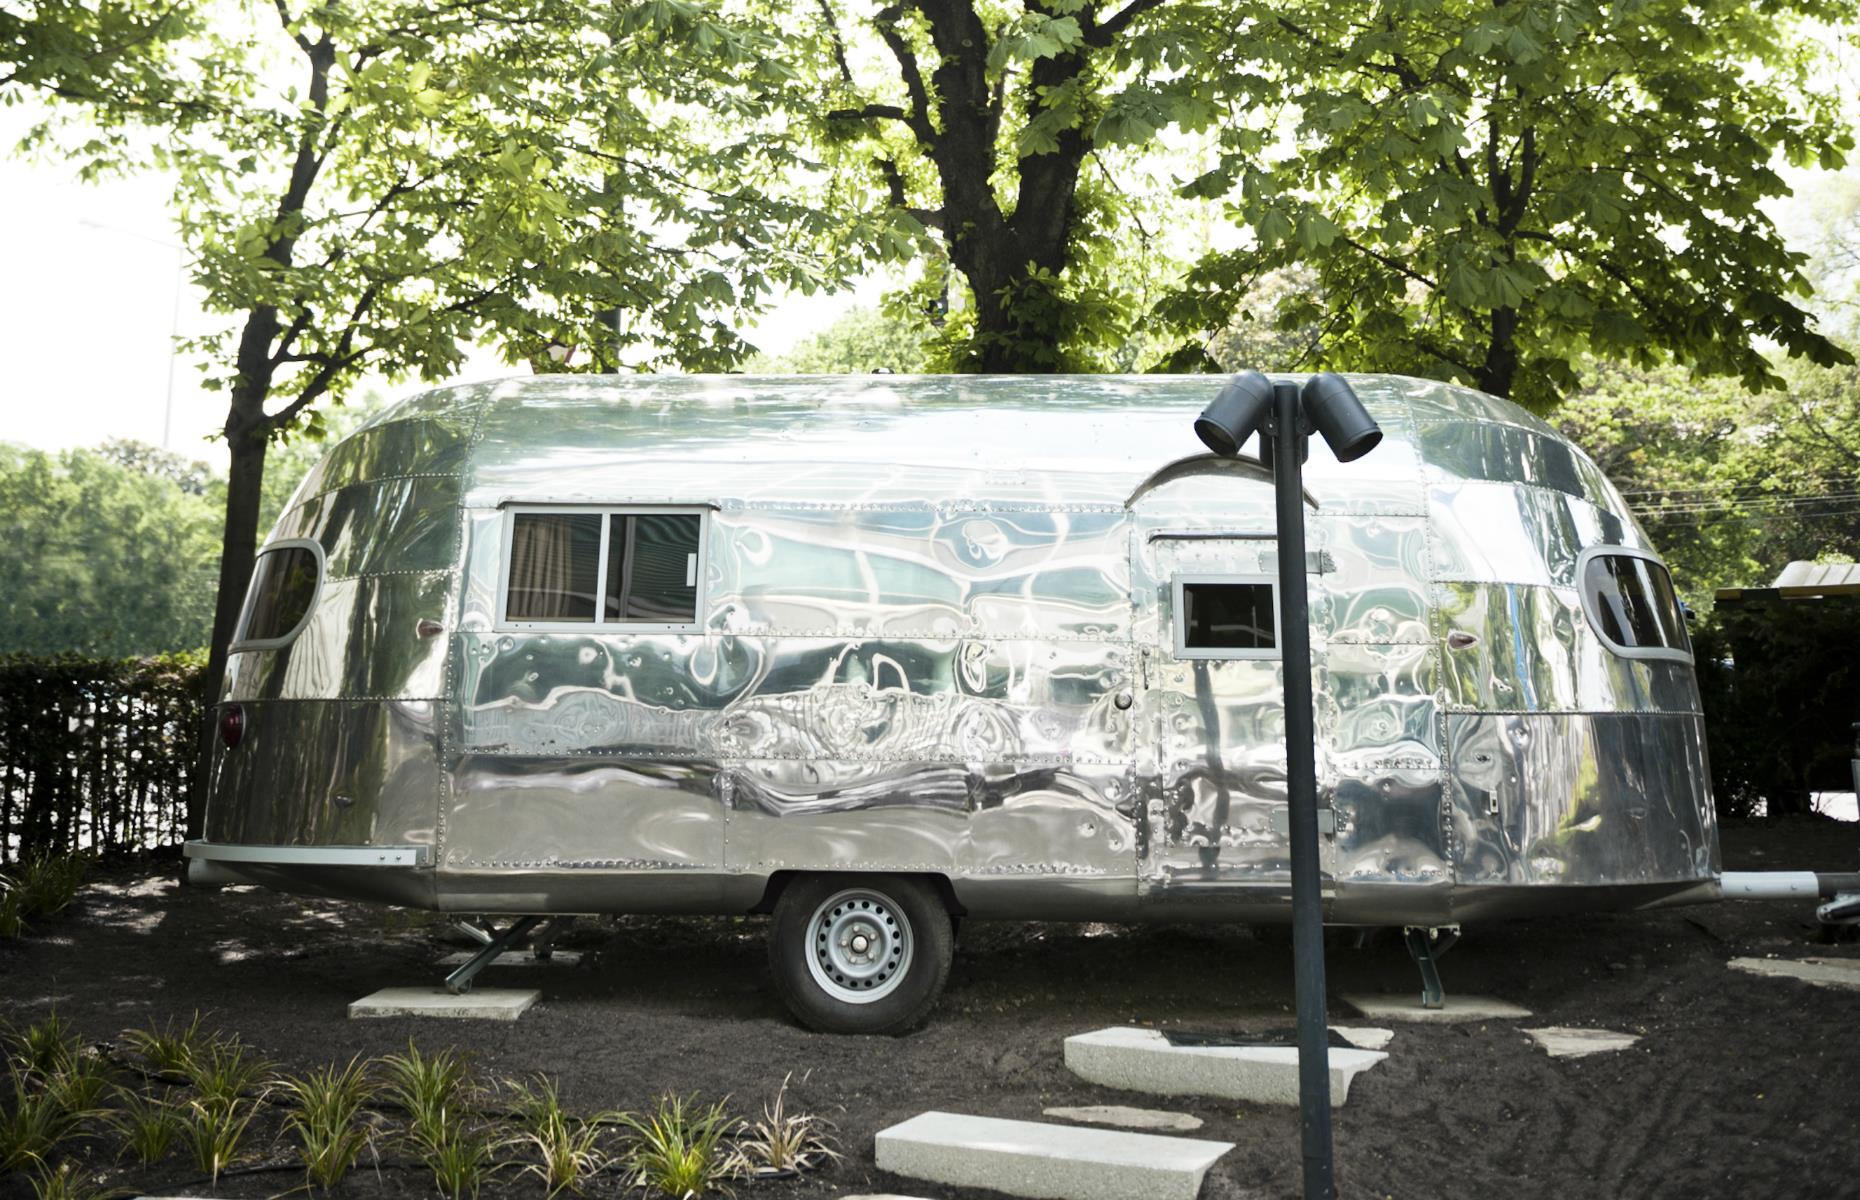 <p>Just 15 minutes from the center of Vienna, <a href="https://hoteldaniel.com/en/vienna/rooms/trailer/">Room 777</a> is a 1952 Airstream with a difference. As well as its location in the grounds of the super-cool Hotel Daniel, this heat and sound-insulated Airstream even has its own free-standing bath. The hotel has its own beehives and bakery too – could it get any trendier?</p>